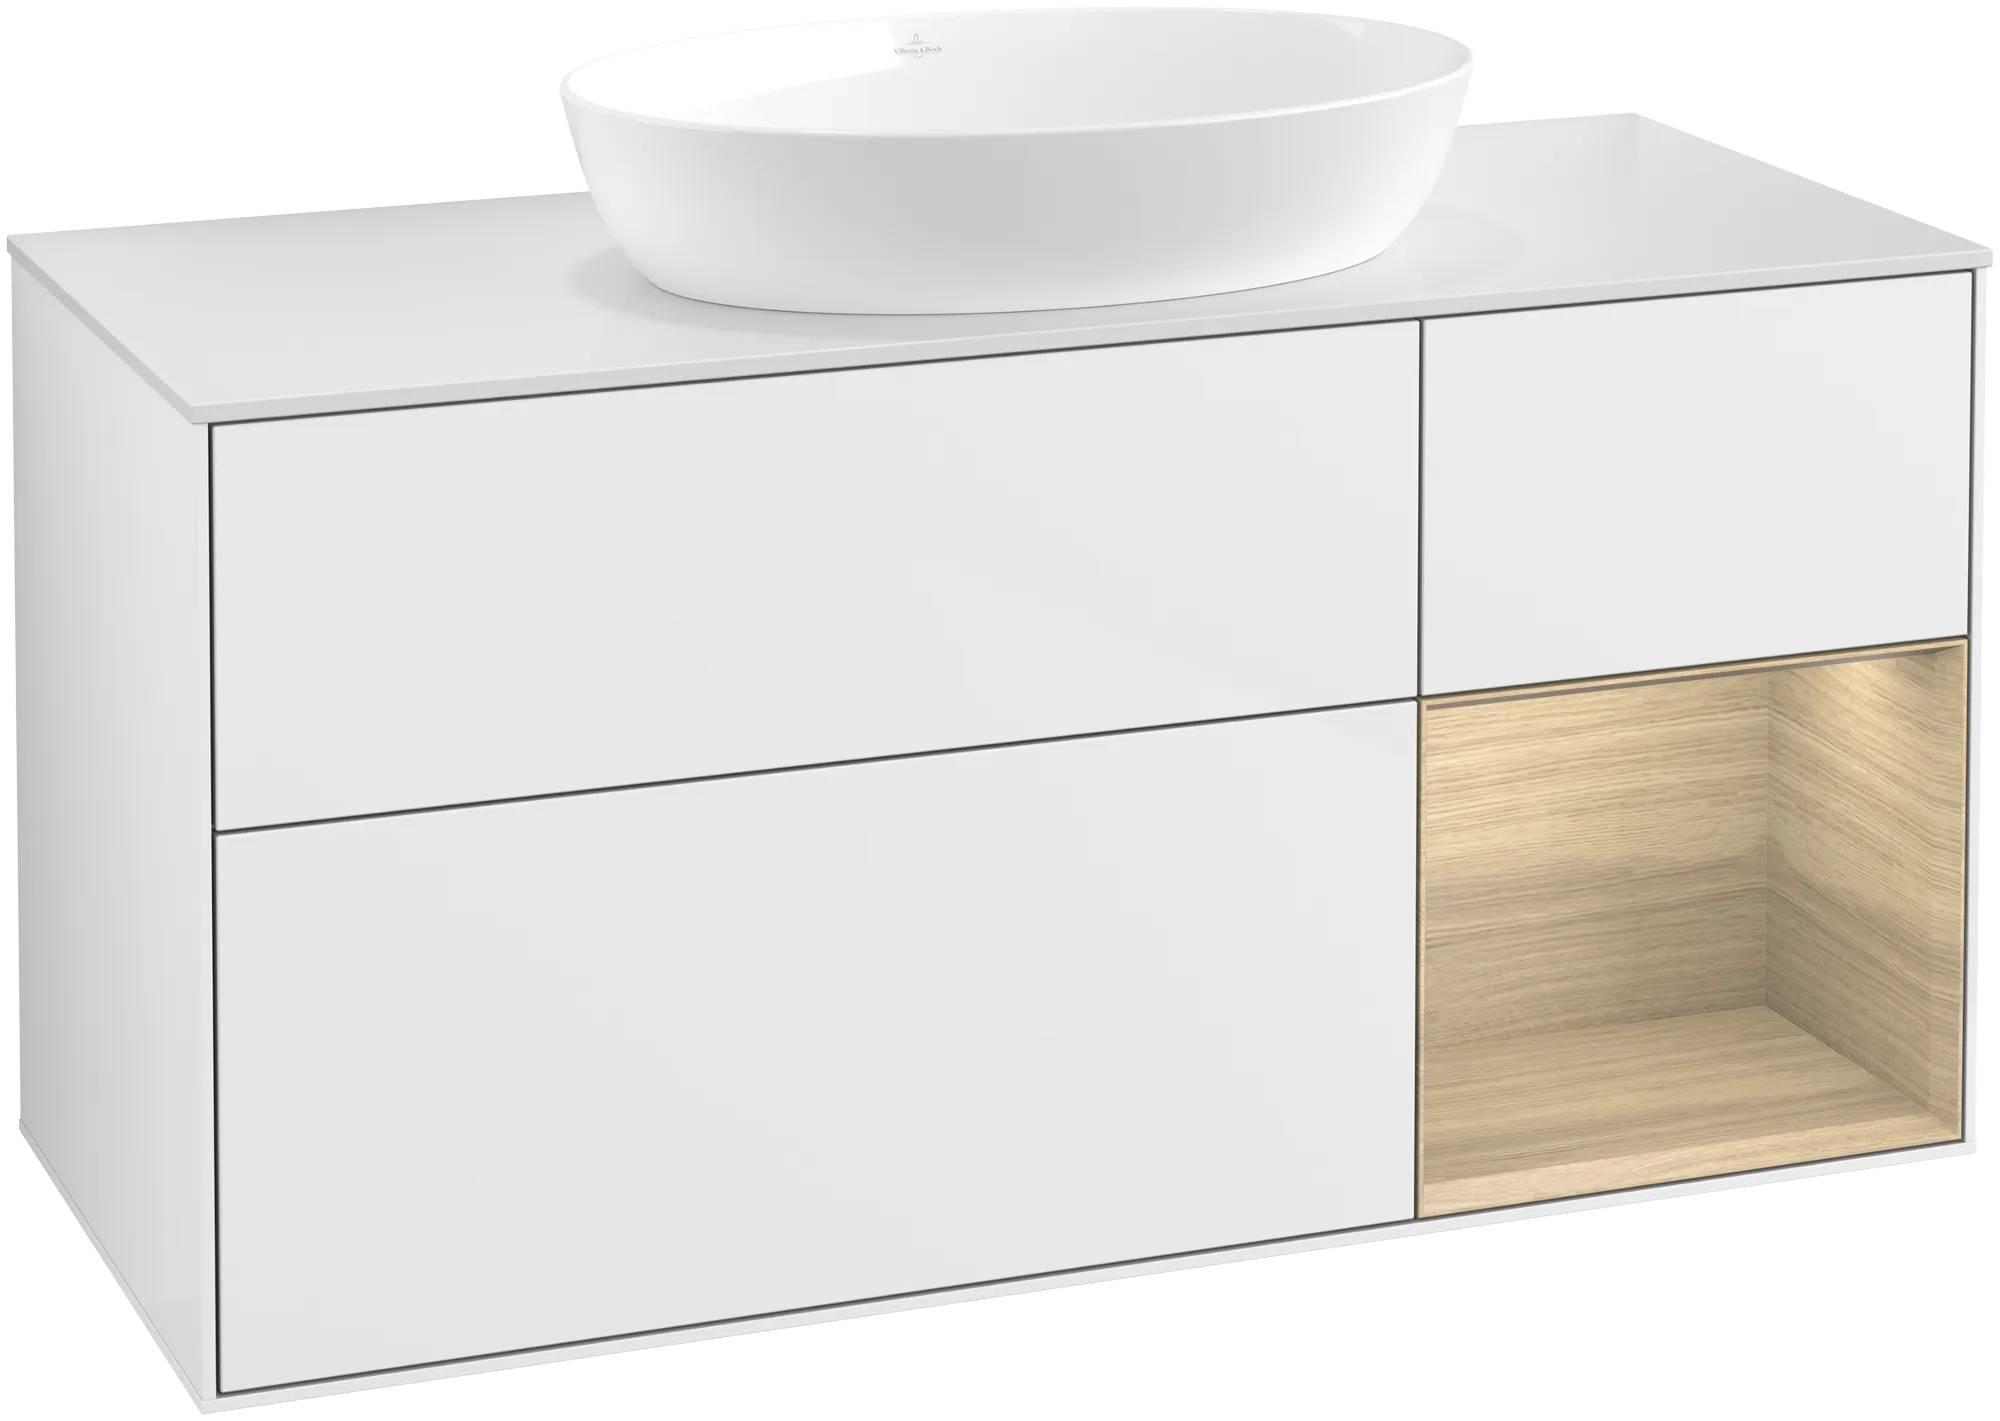 Obrázek VILLEROY BOCH Finion Vanity unit, with lighting, 3 pull-out compartments, 1200 x 603 x 501 mm, Glossy White Lacquer / Oak Veneer / Glass White Matt #GA71PCGF